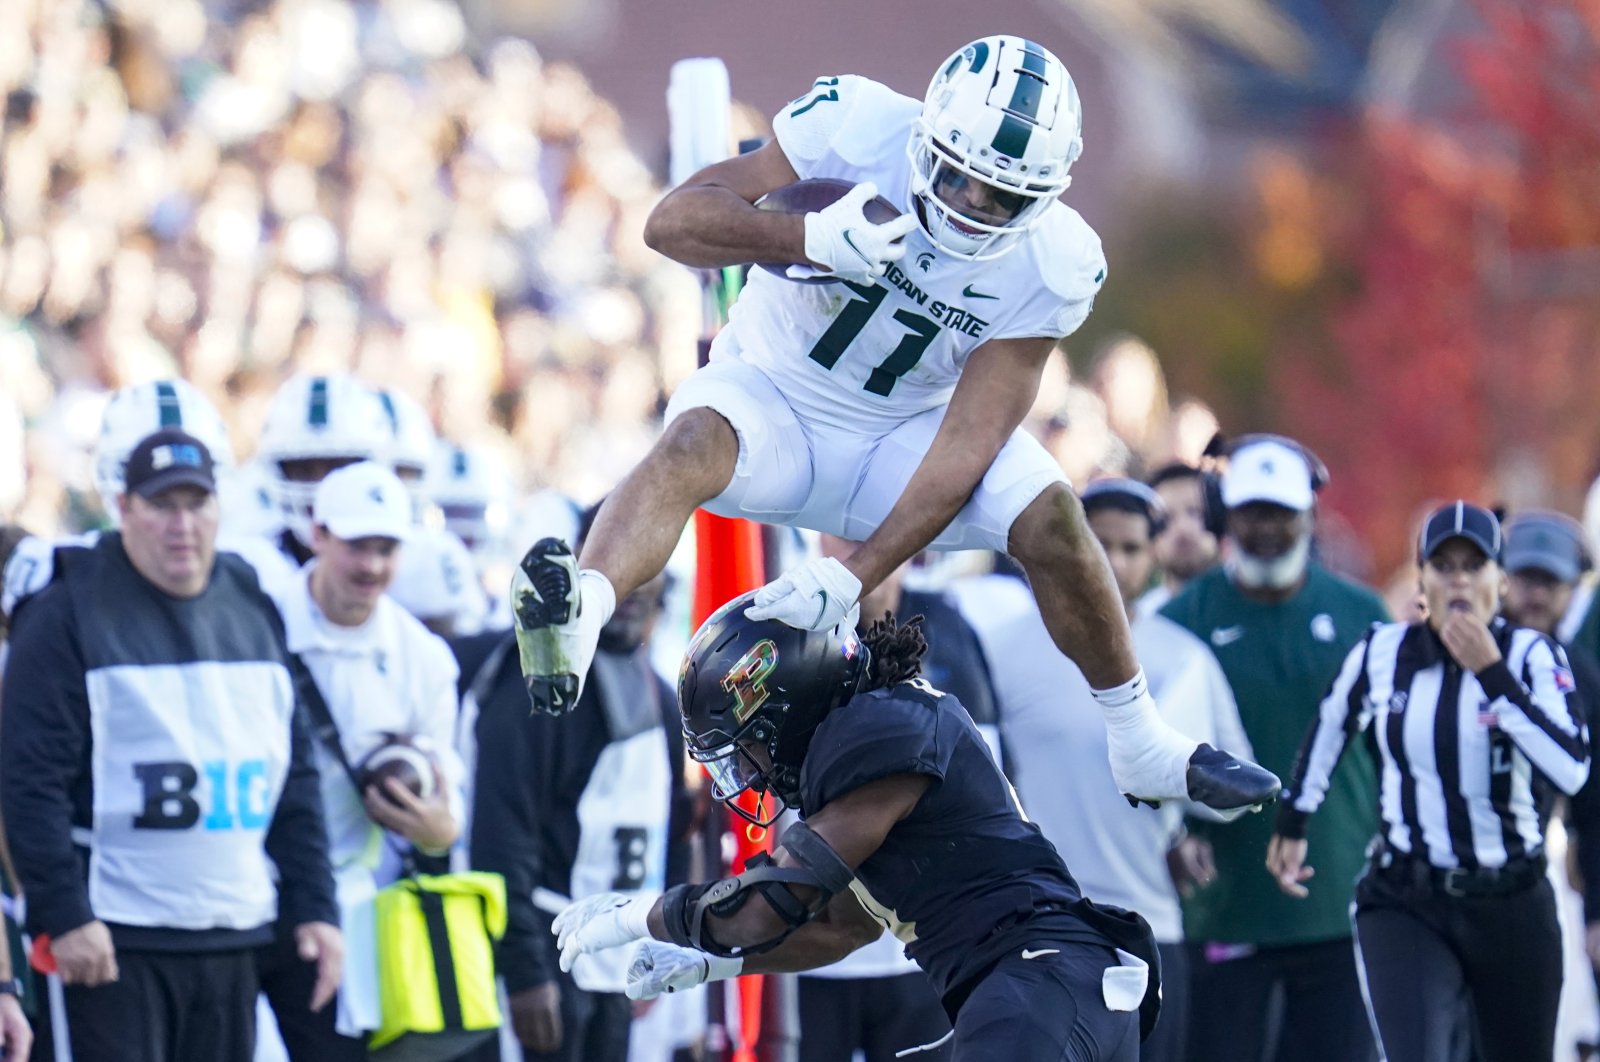 Michigan State running back Connor Heyward (11) leaps over Purdue safety Marvin Grant (4) during the first half of an NCAA college football game, West Lafayette, Indiana, U.S., Nov. 6, 2021. (AP Photo)